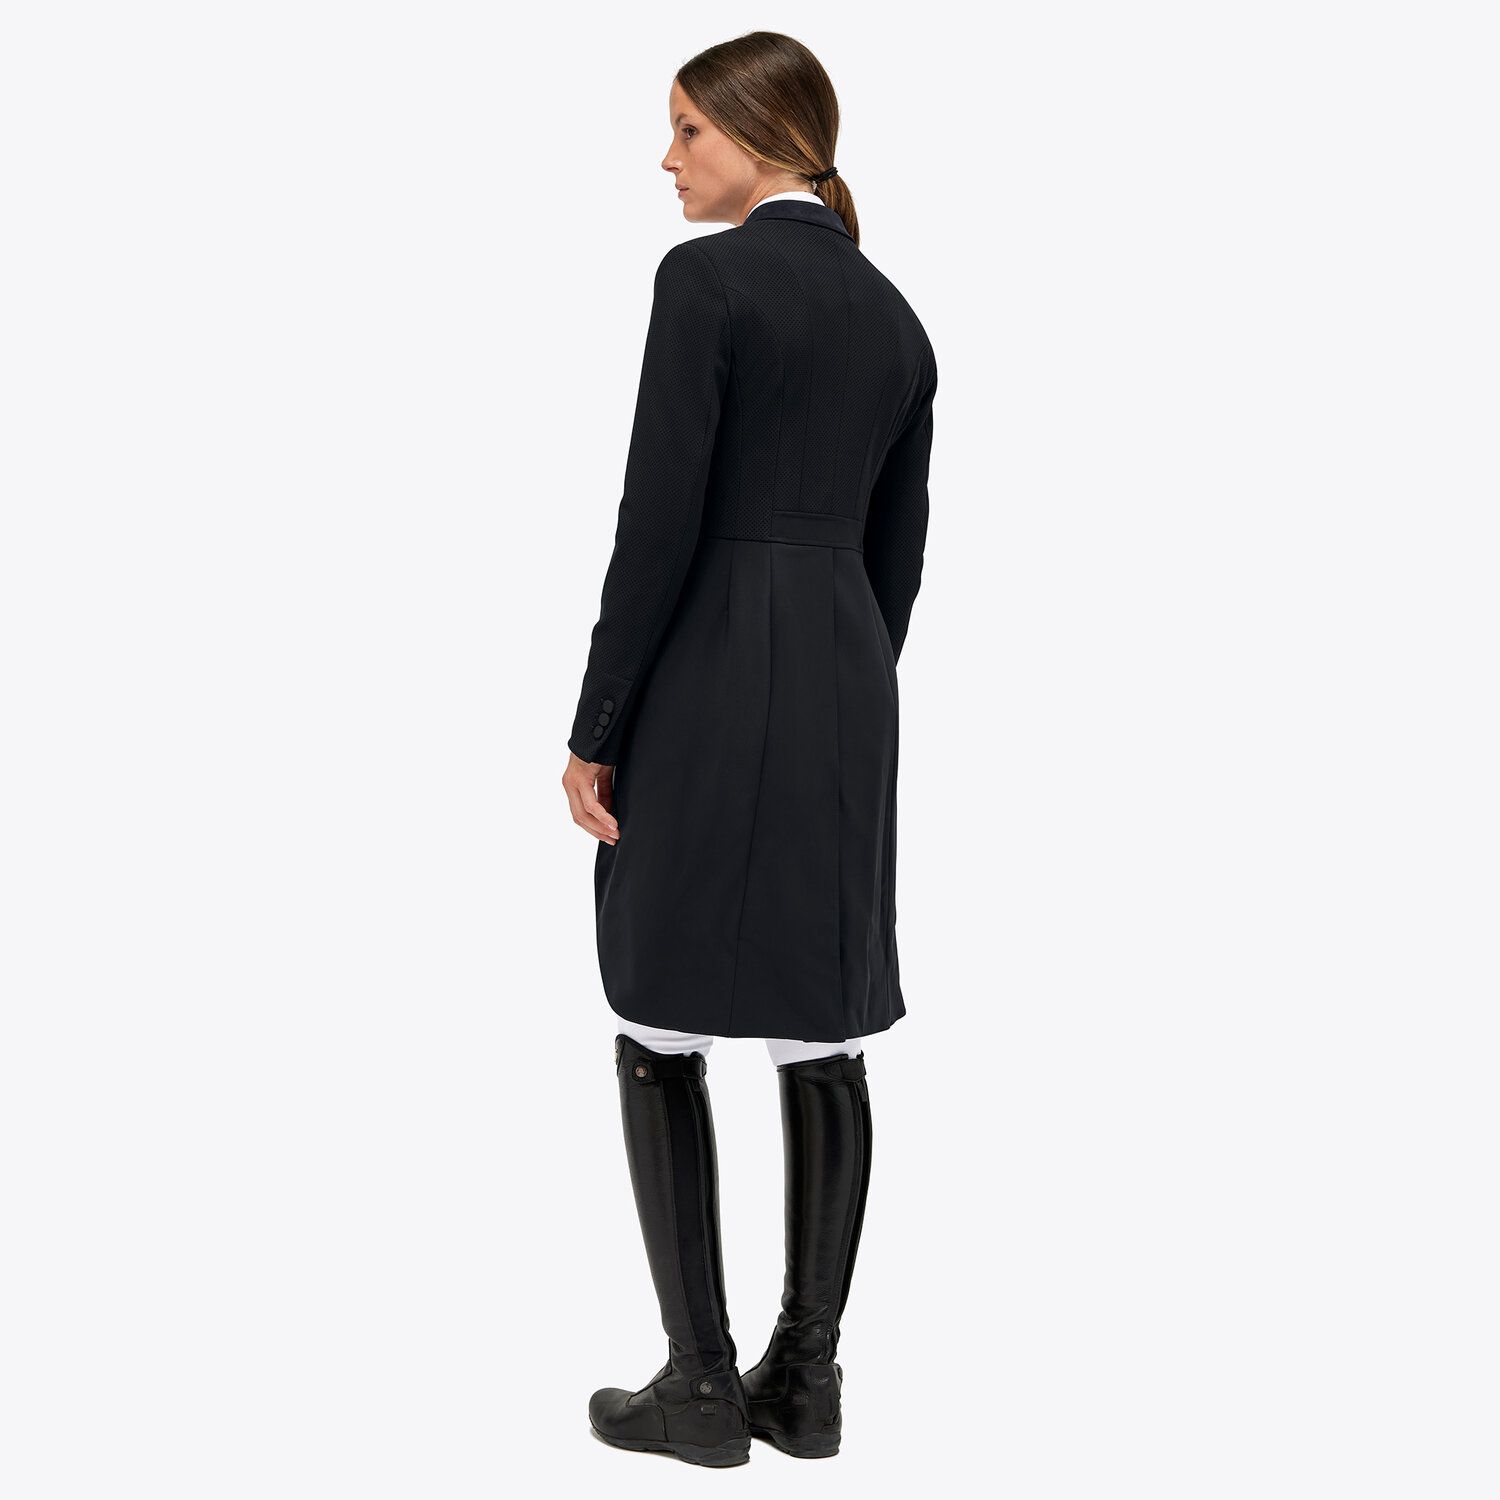 Cavalleria Toscana Women's tailcoat with covered b BLACK-3